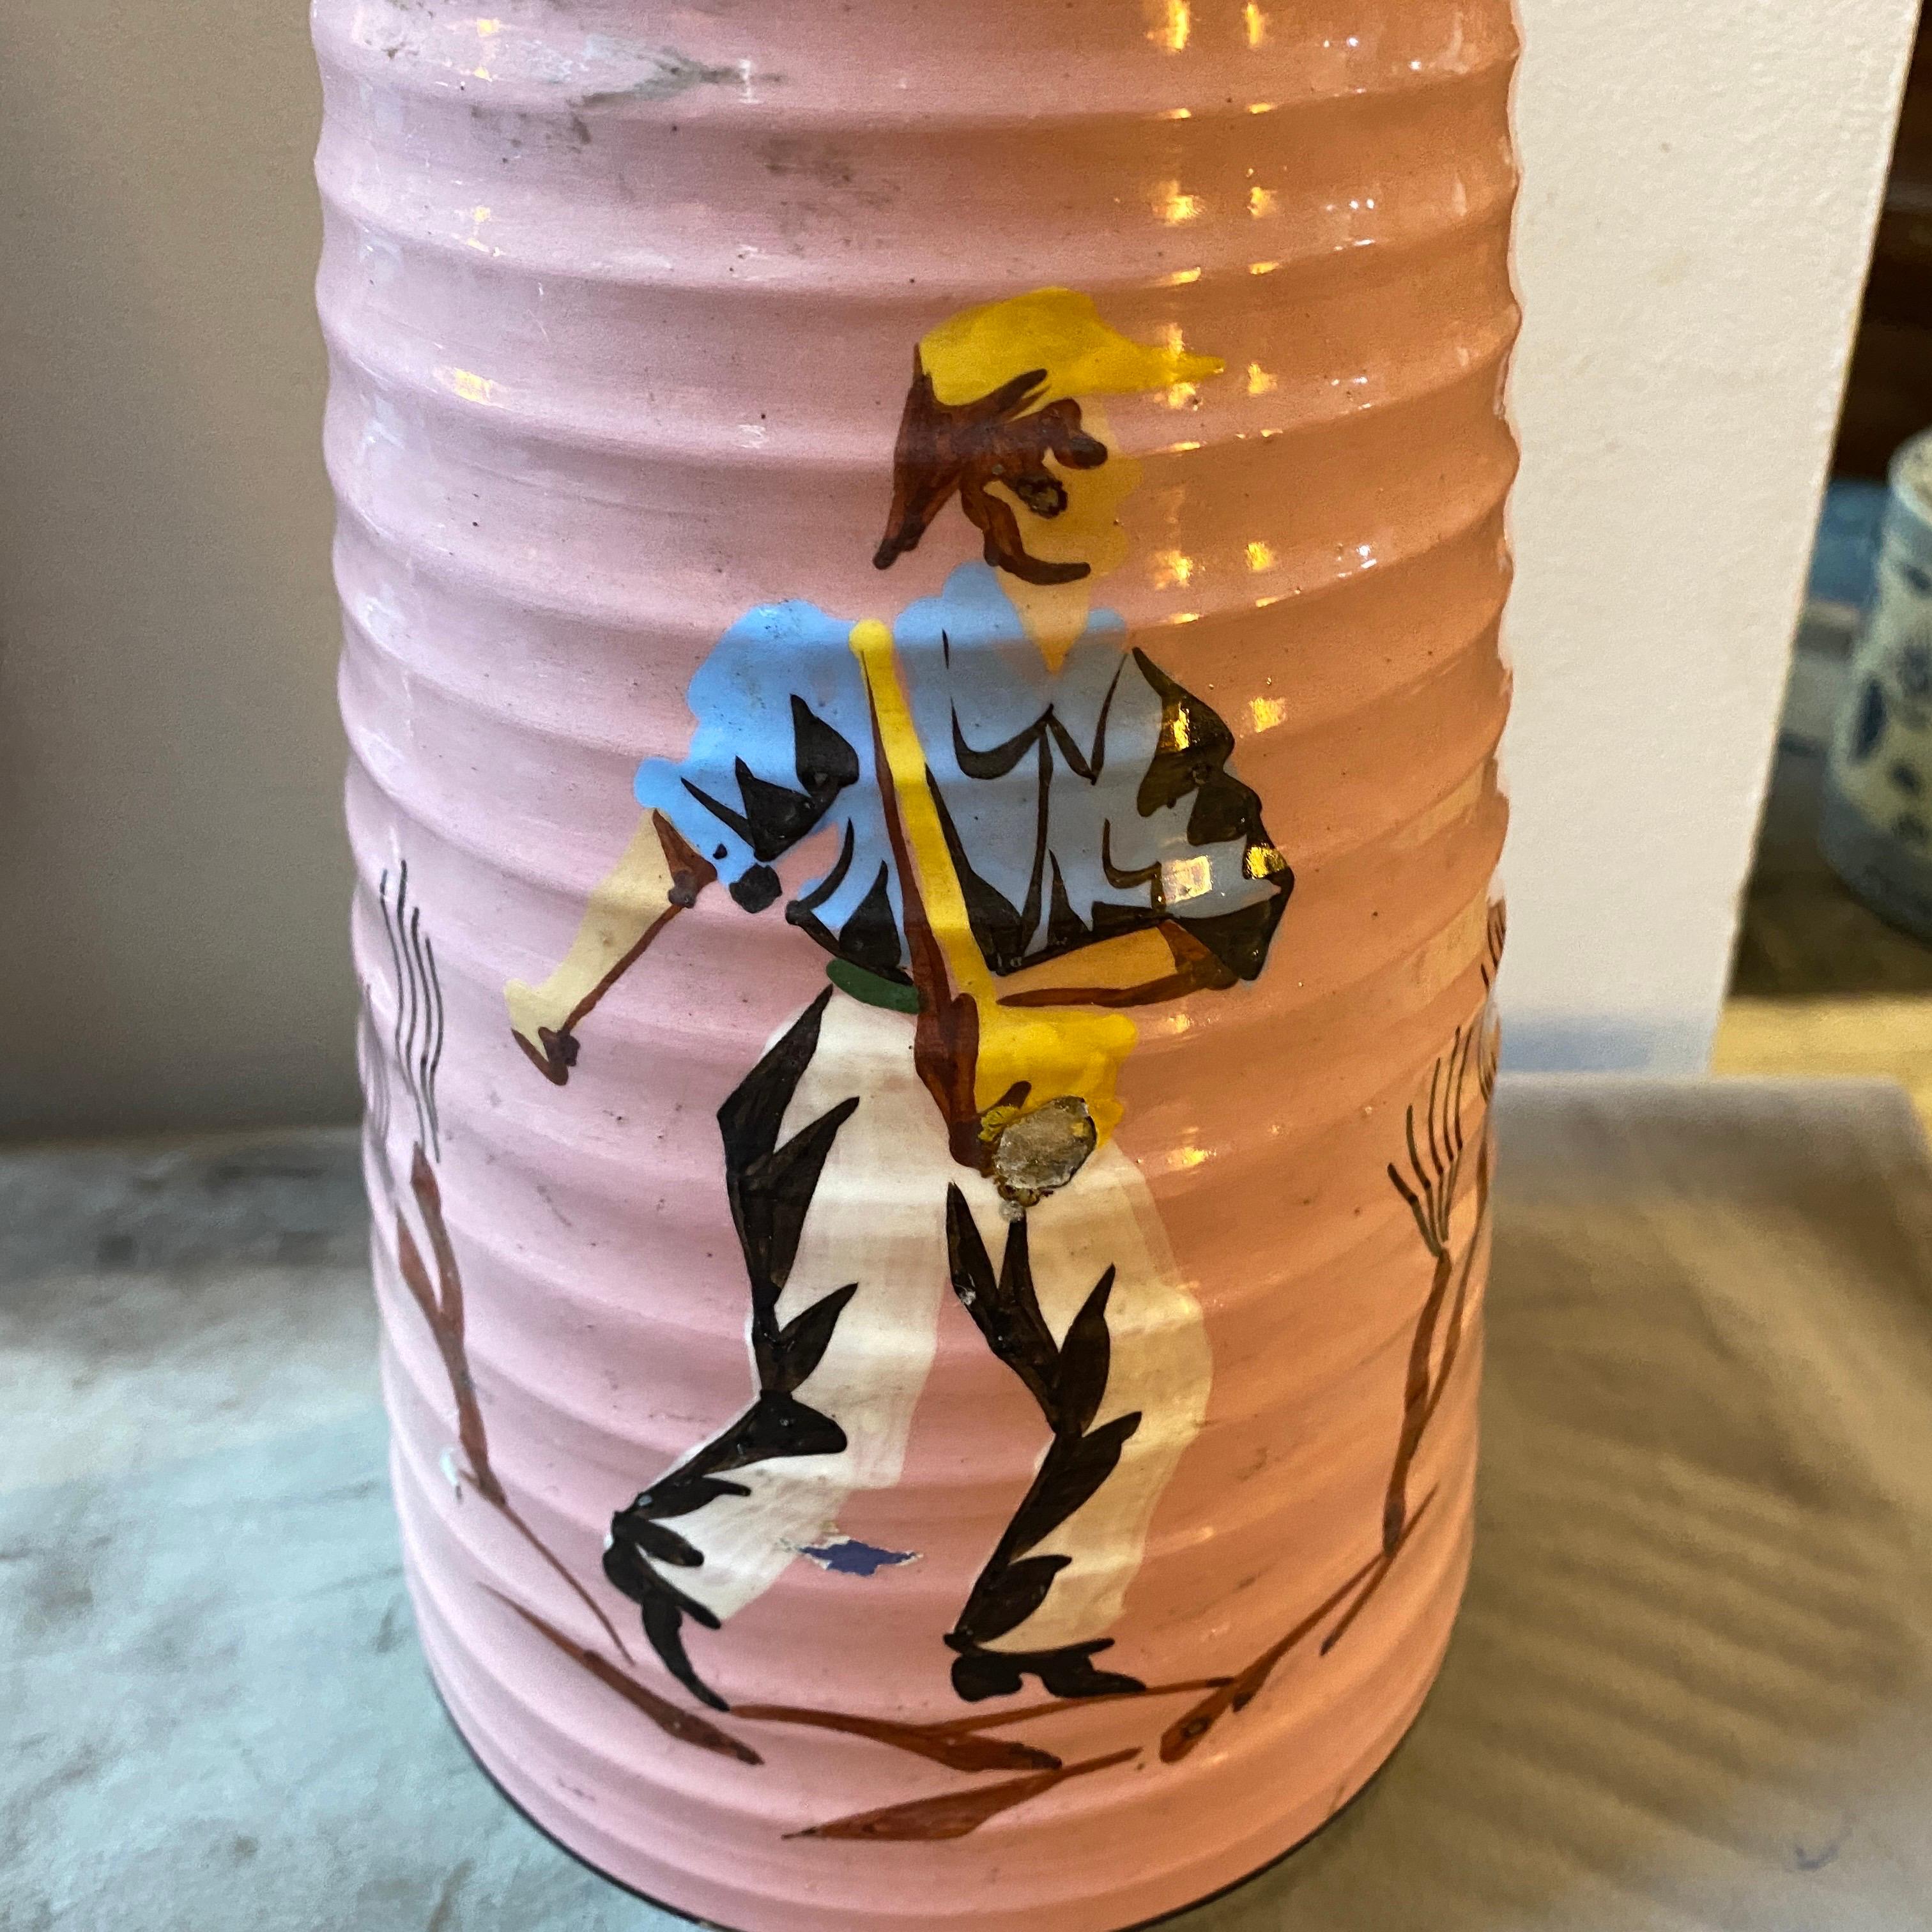 A ceramic vase designed and manufactured in Italy in the Thirties, it has signs of use and age visible on the photos. It's an iconic piece of Italian Futurism Movement.